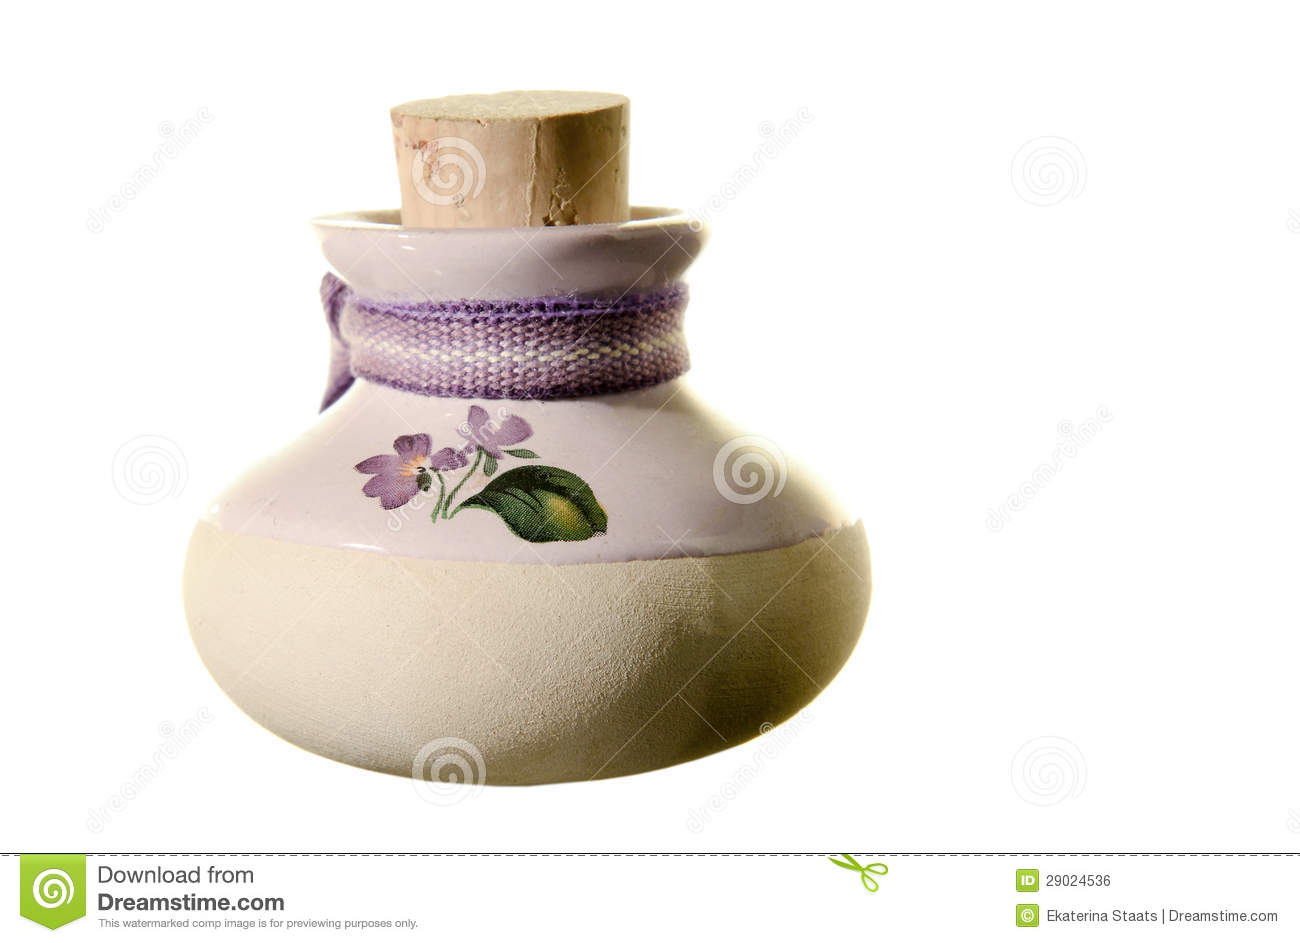 Essential Oil Bottle Royalty Free Stock Image   Image  29024536